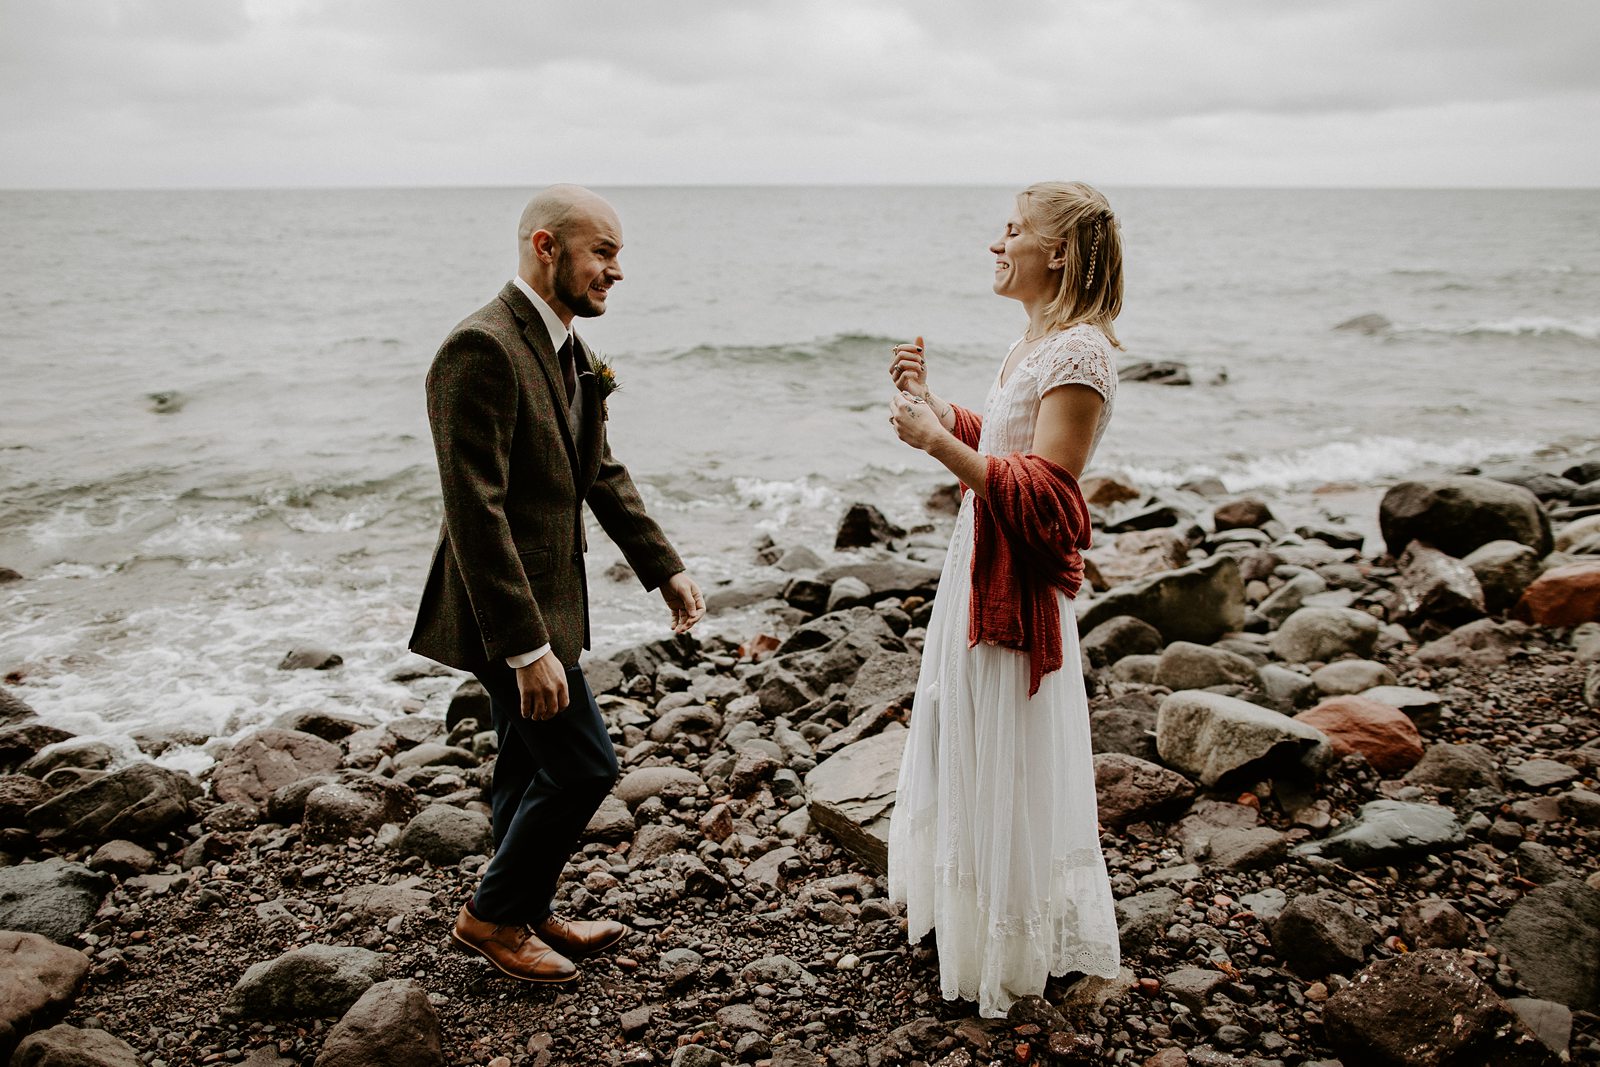 Paul and Taylor's intimate, eclectic North Shore wedding at a geodesic dome on the shores of Lake Superior was a special day I'll always remember!